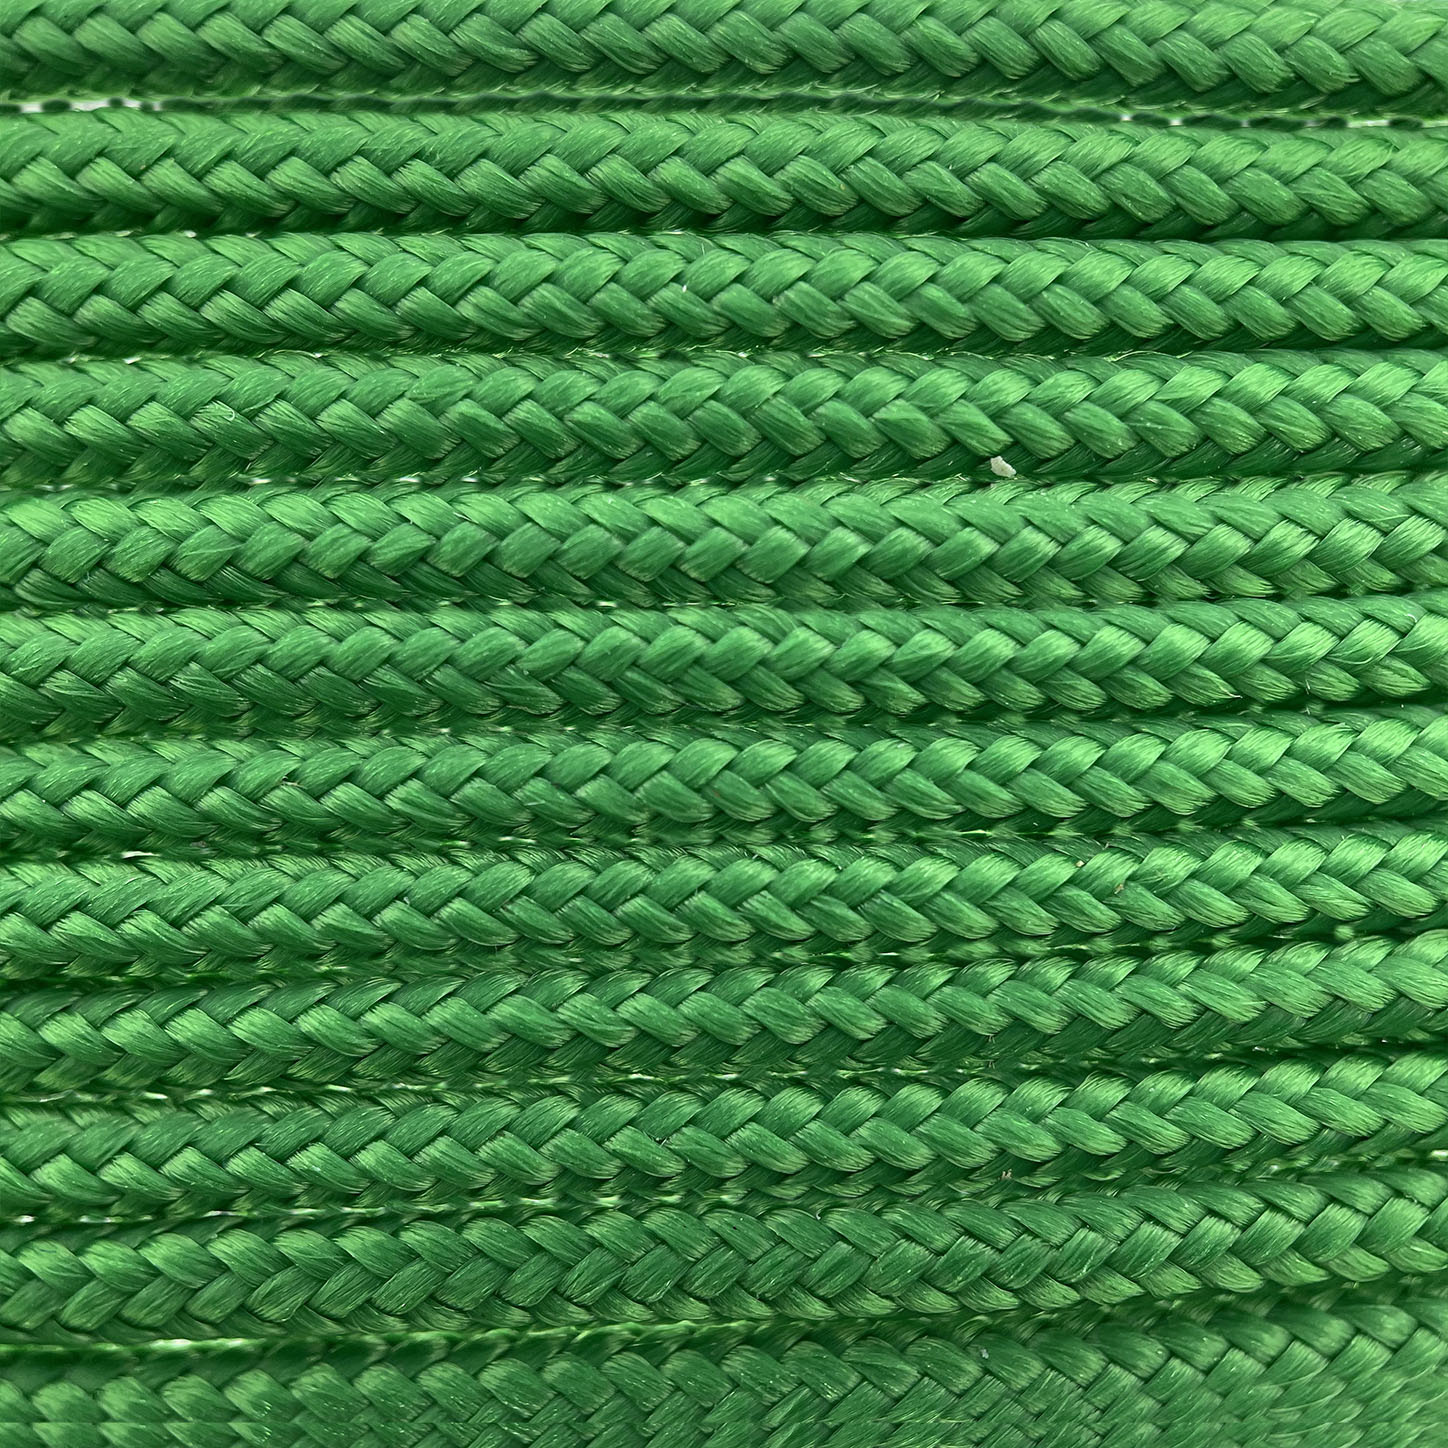 Buy Paracord 100 type I Grass Green from the expert - 123Paracord